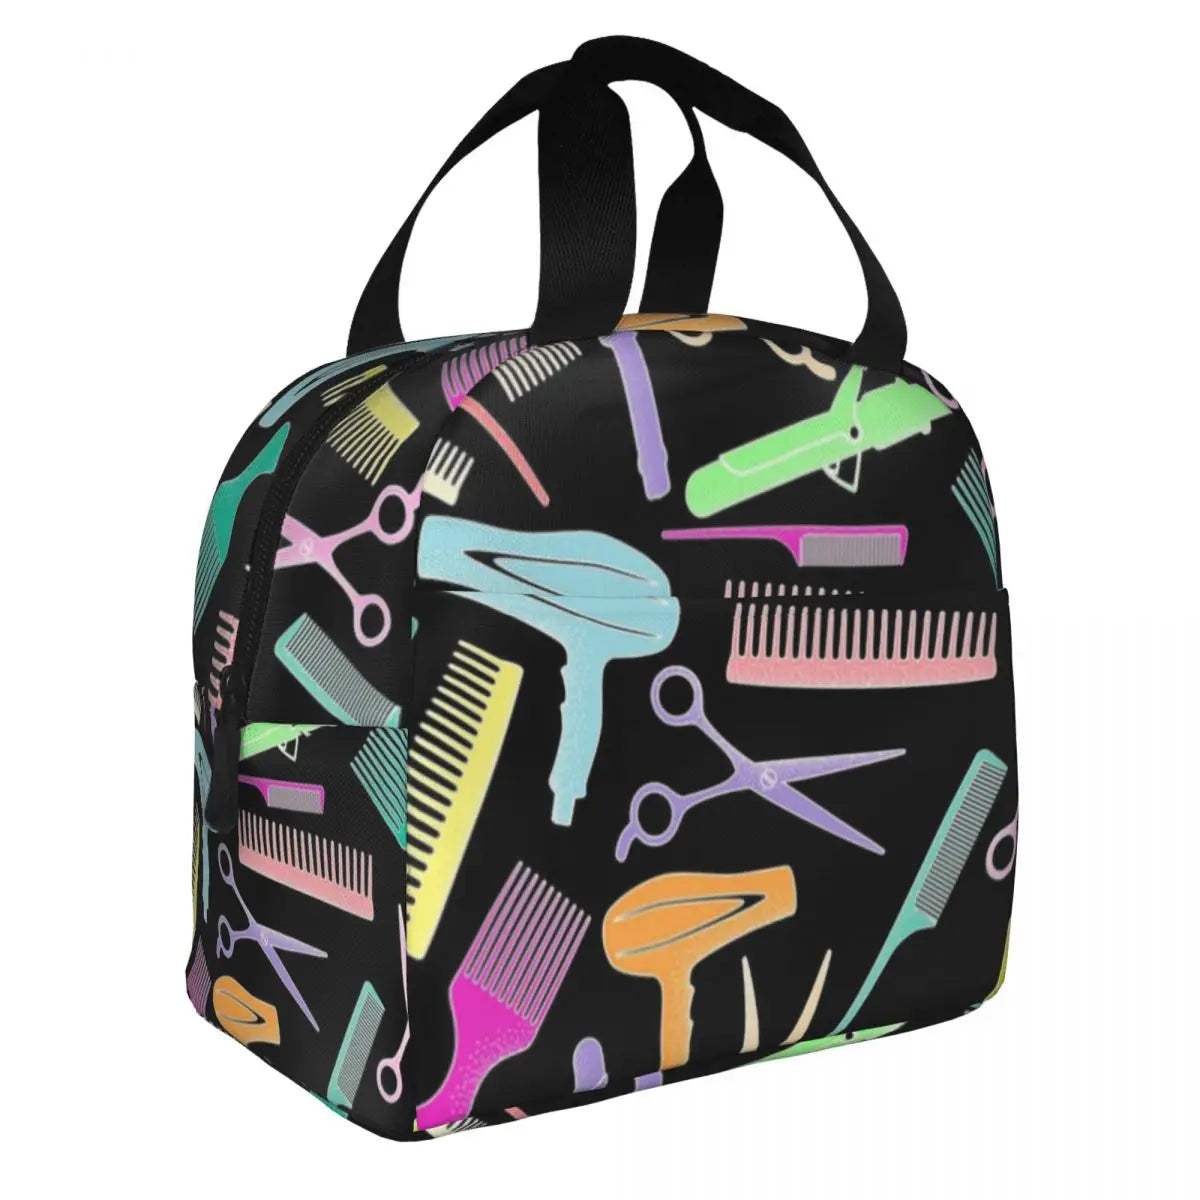 Salon Insulated Thermal Lunch Bag